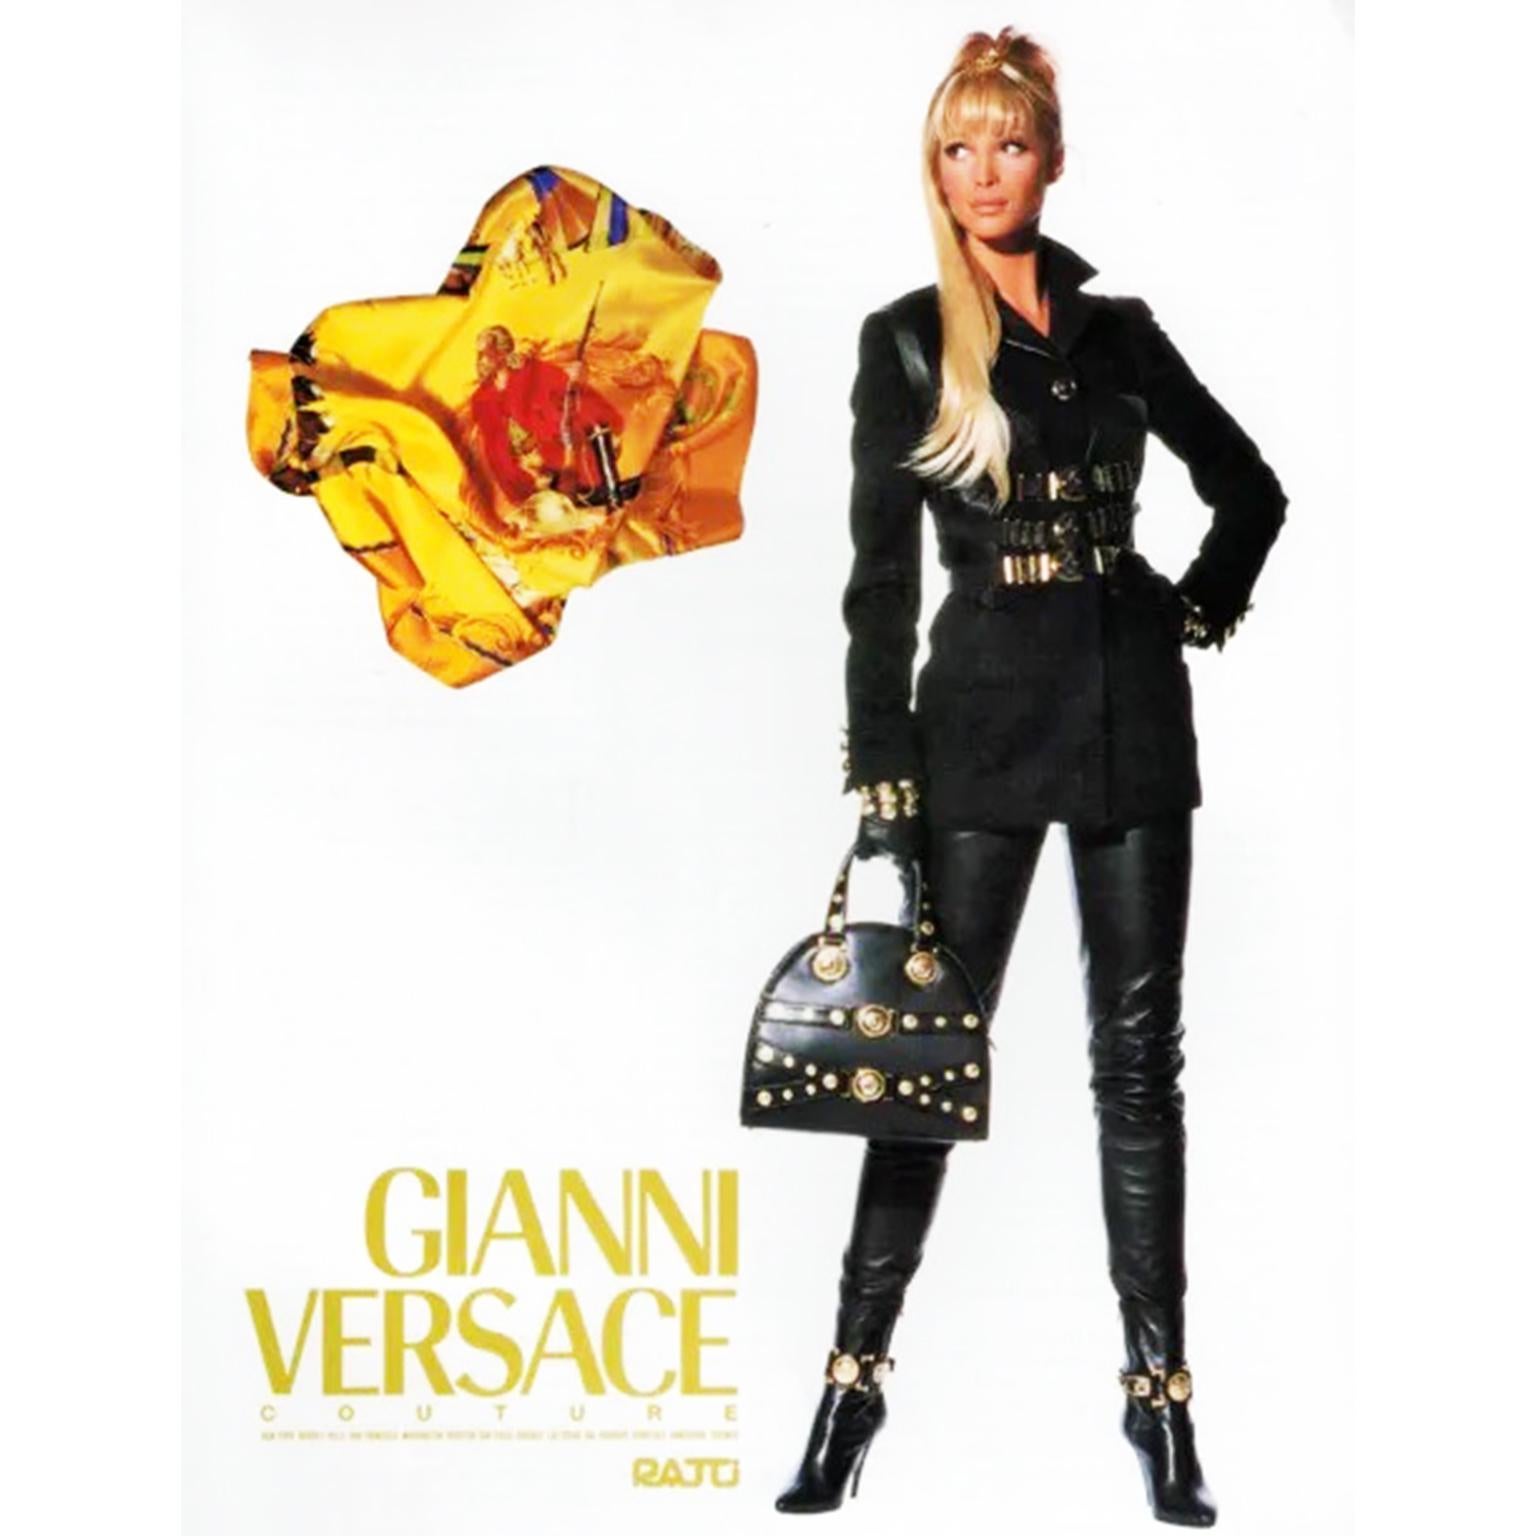 This iconic Gianni Versace vintage black leather satchel style handbag is from the Versace original F/W 1992 Miss S & M or Bondage Collection. Though Donatella Versace did a tribute collection that included this same bag, this is the original! The